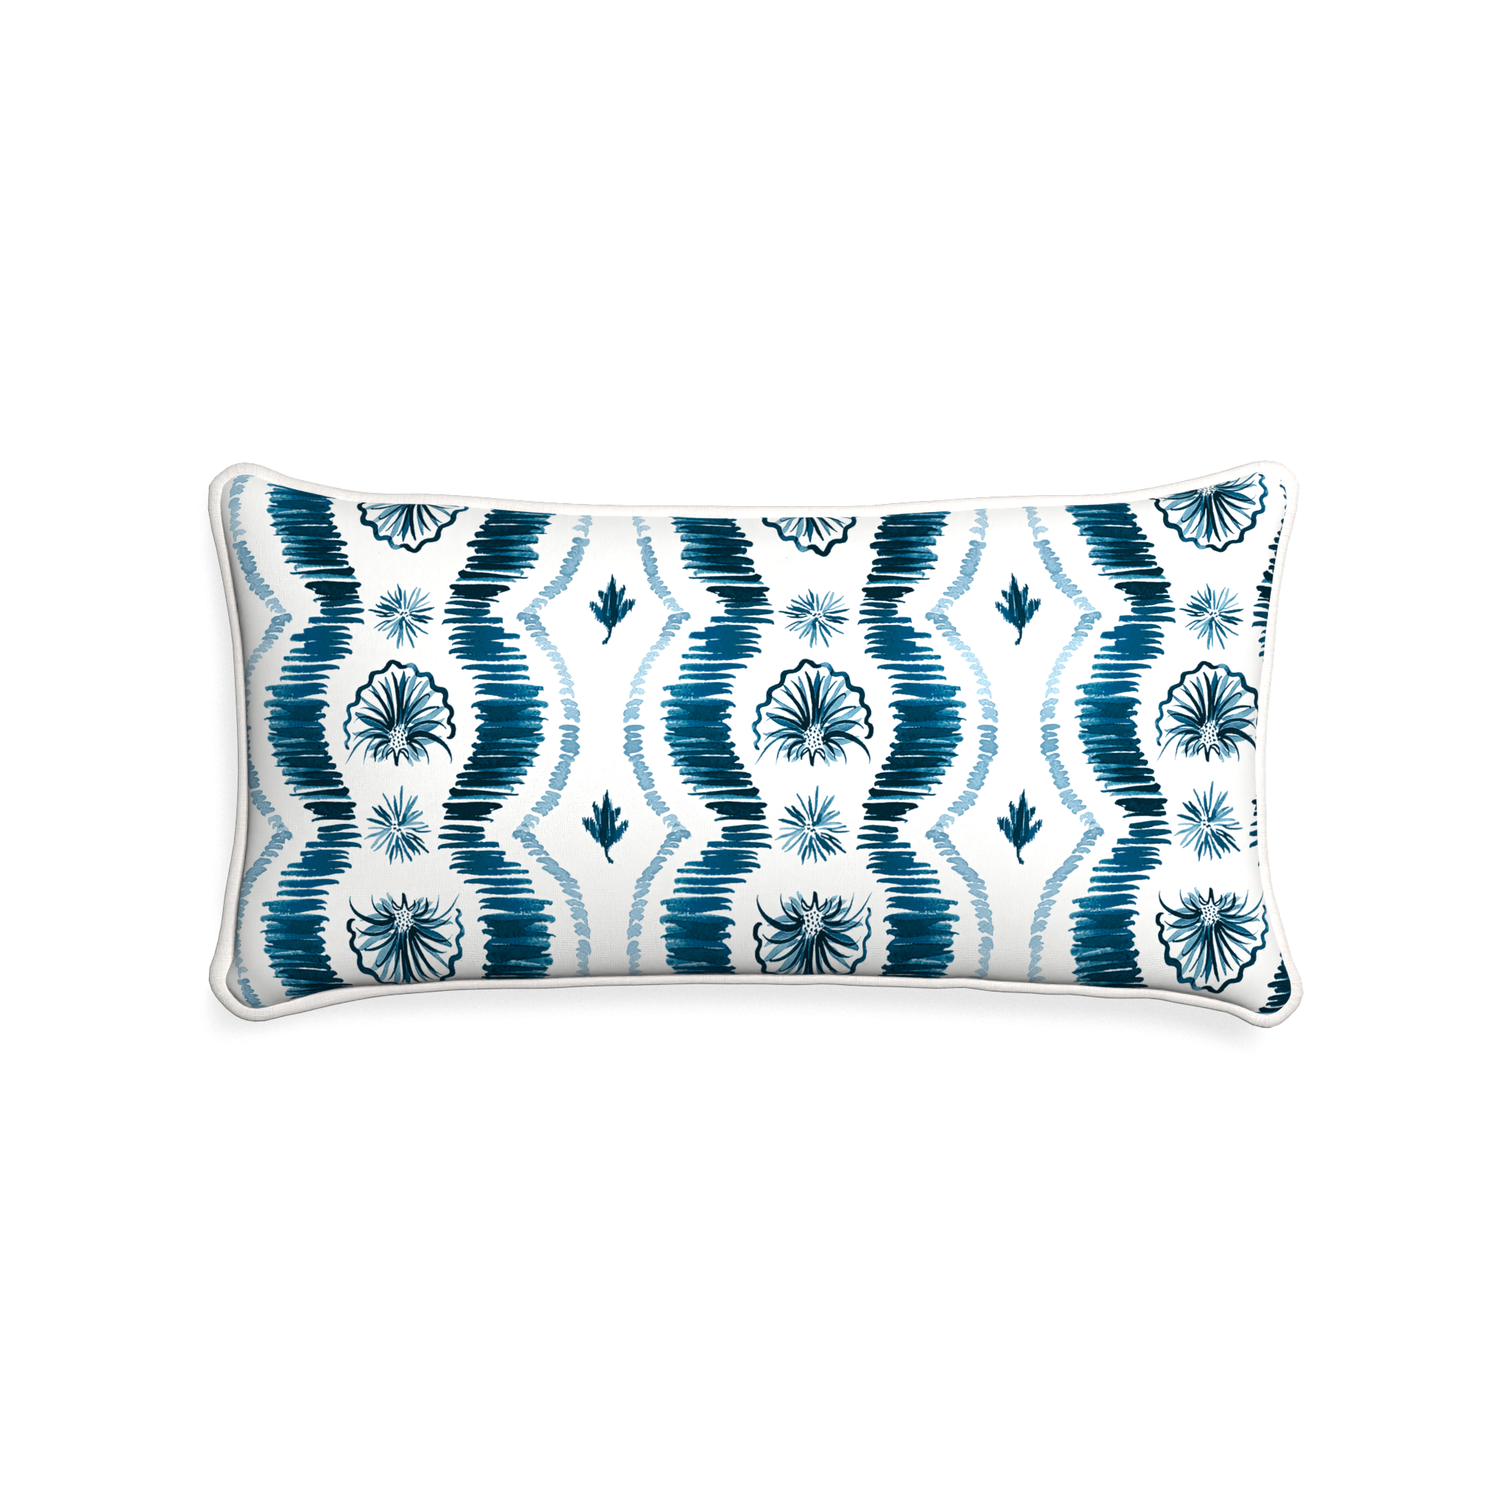 Midi-lumbar alice custom blue ikatpillow with snow piping on white background